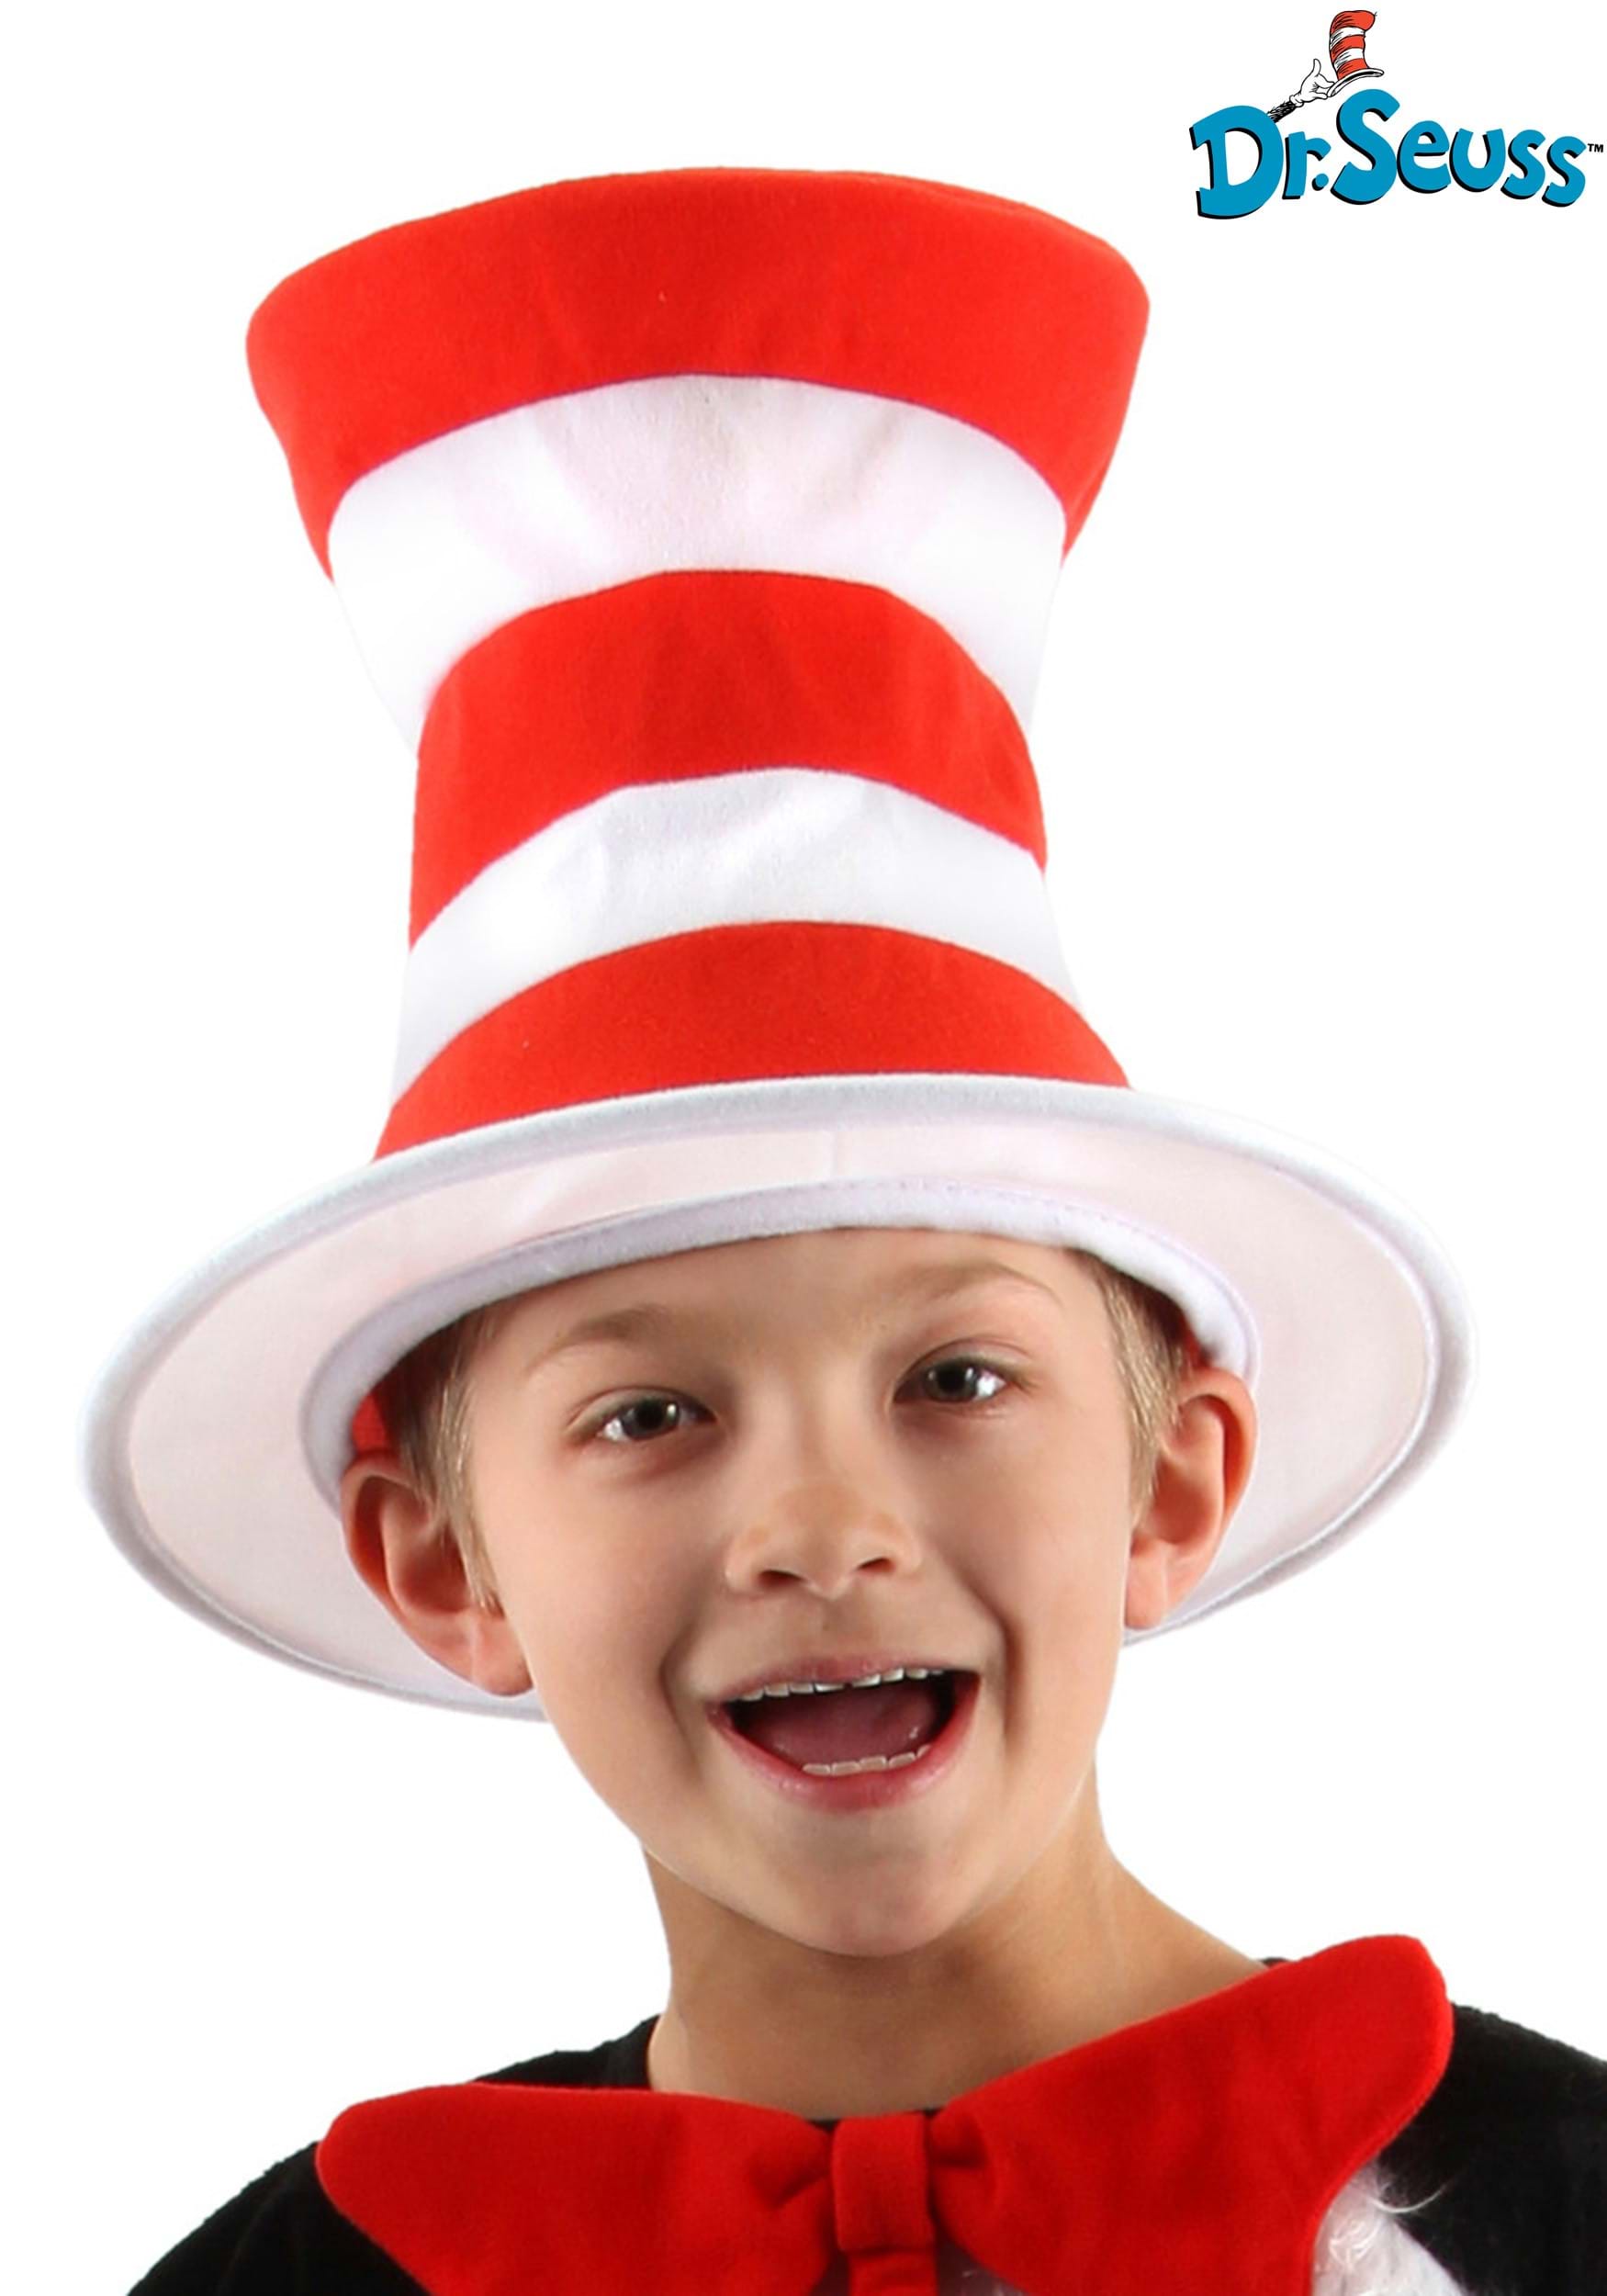 http://images.halloweencostumes.com/products/3359/1-1/kids-cat-in-the-hat-hat.jpg